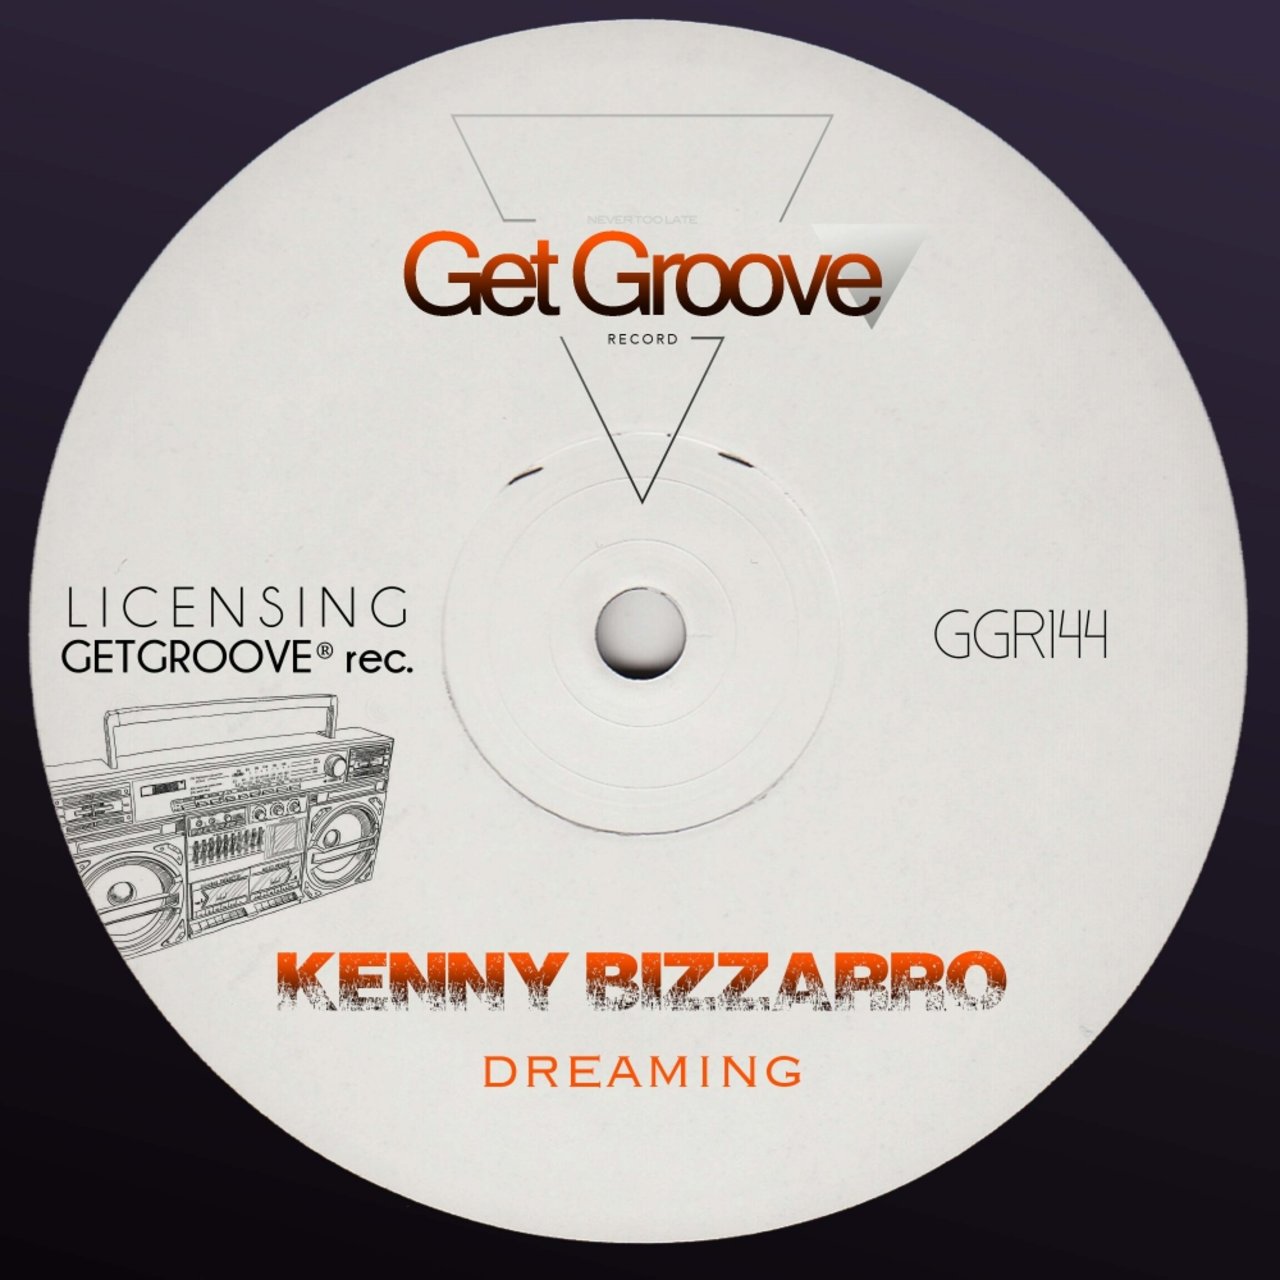 Kenny Bizzarro - Dreaming / Get Groove Record